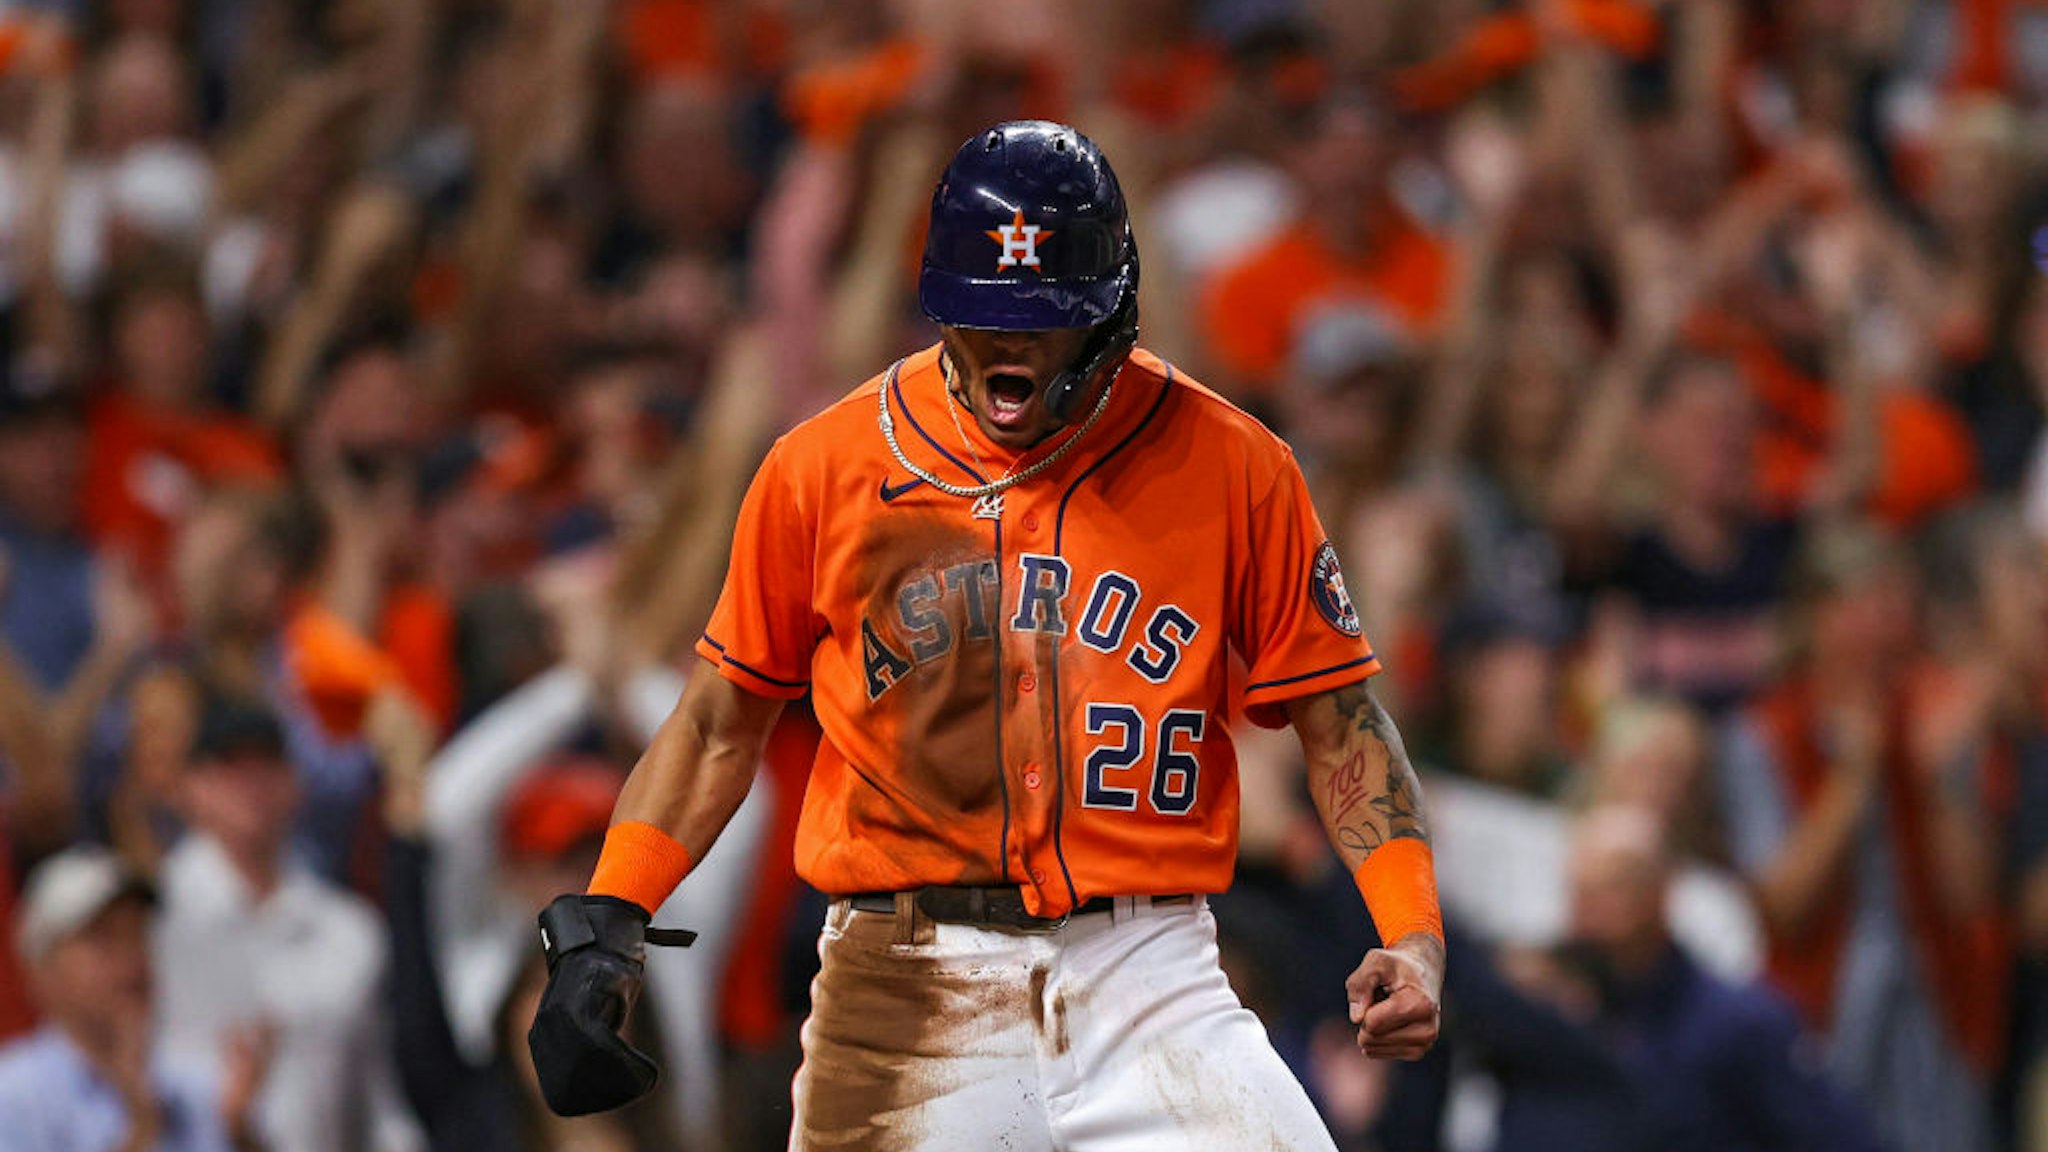 HOUSTON, TEXAS - OCTOBER 27: Jose Siri #26 of the Houston Astros celebrates after scoring a run against the Atlanta Braves during the second inning in Game Two of the World Series at Minute Maid Park on October 27, 2021 in Houston, Texas. (Photo by Patrick Smith/Getty Images)